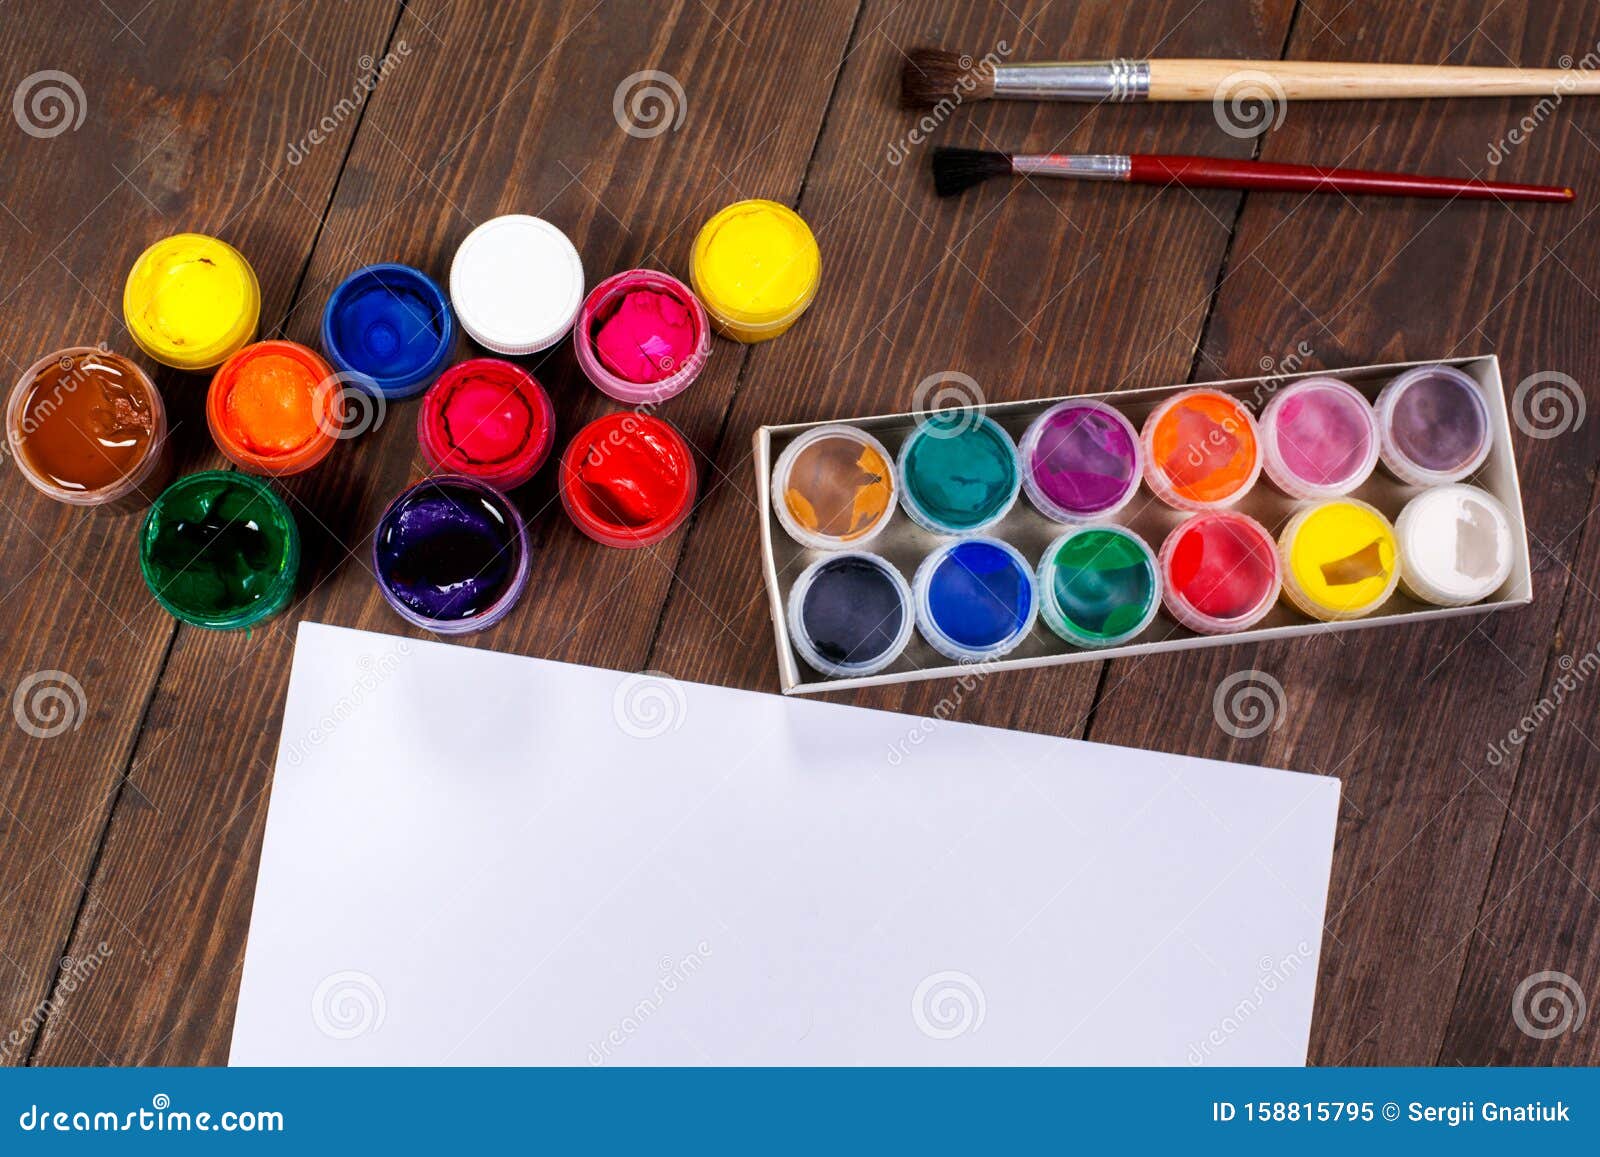 School Education Objects Isolated No People Concept Stock Image - Image ...